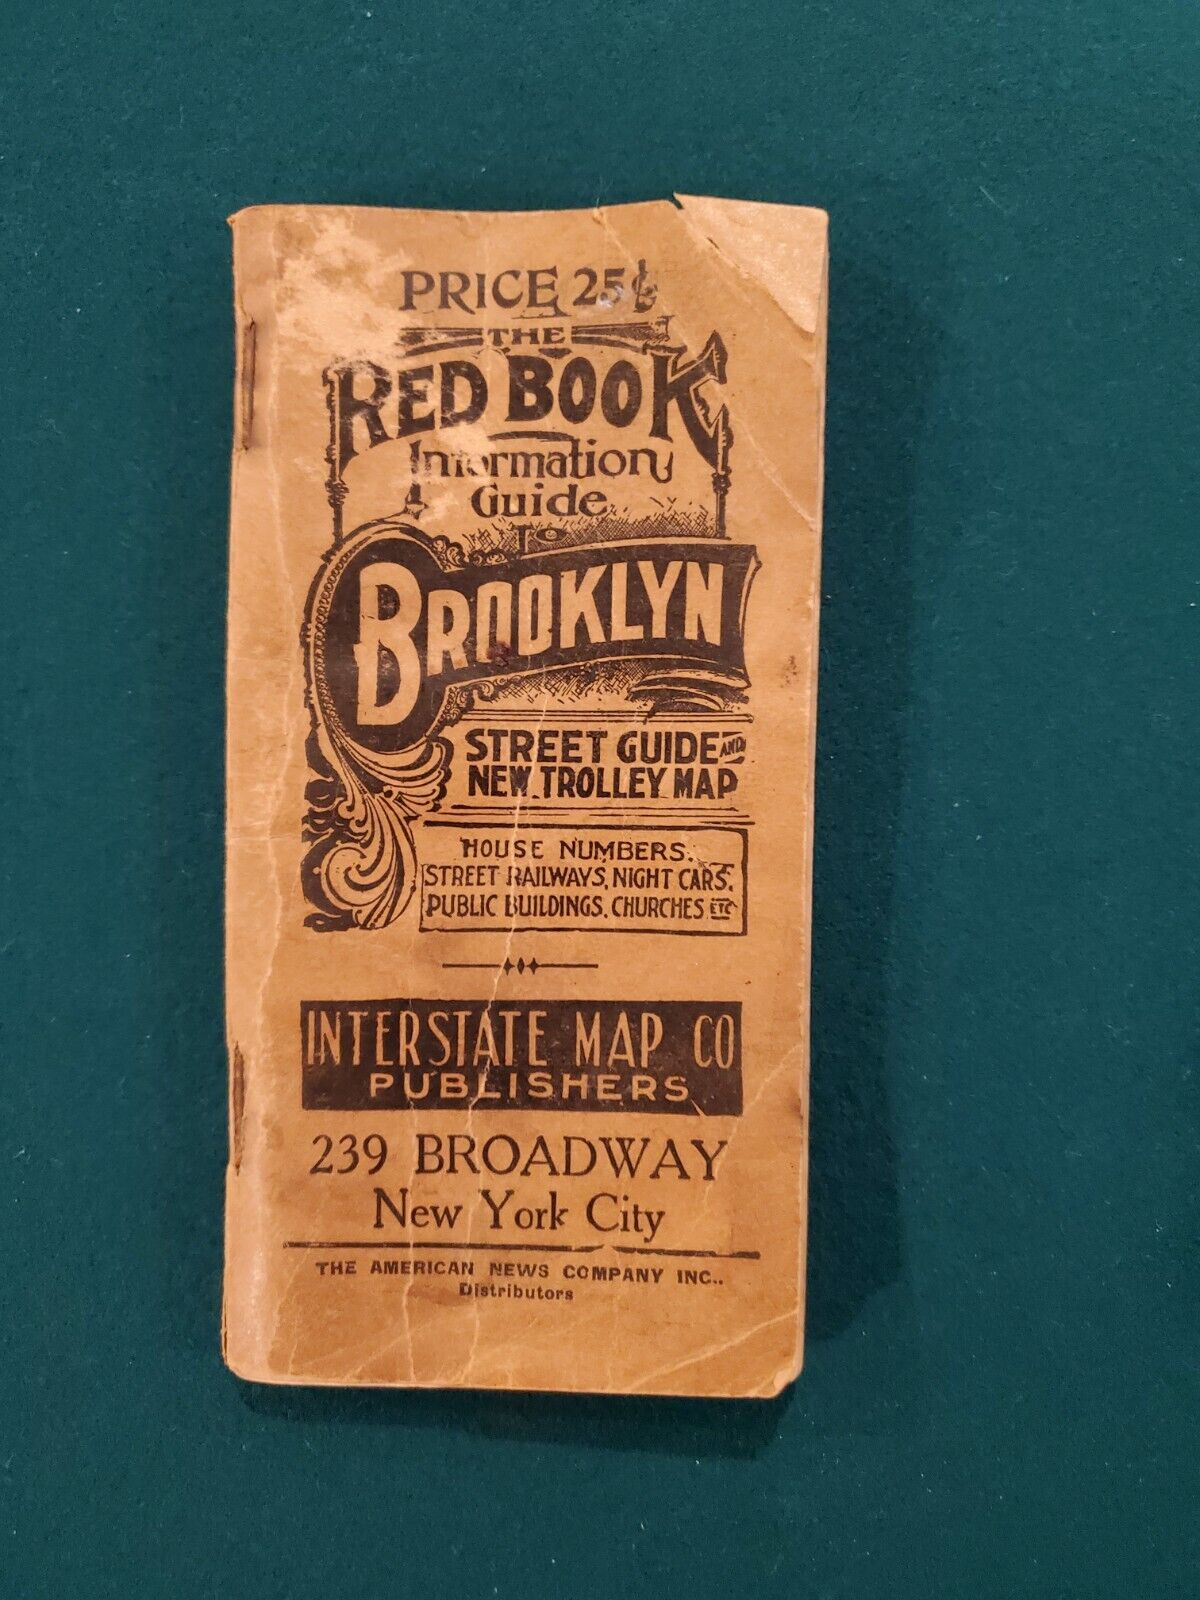 Brooklyn street guide and trolley map